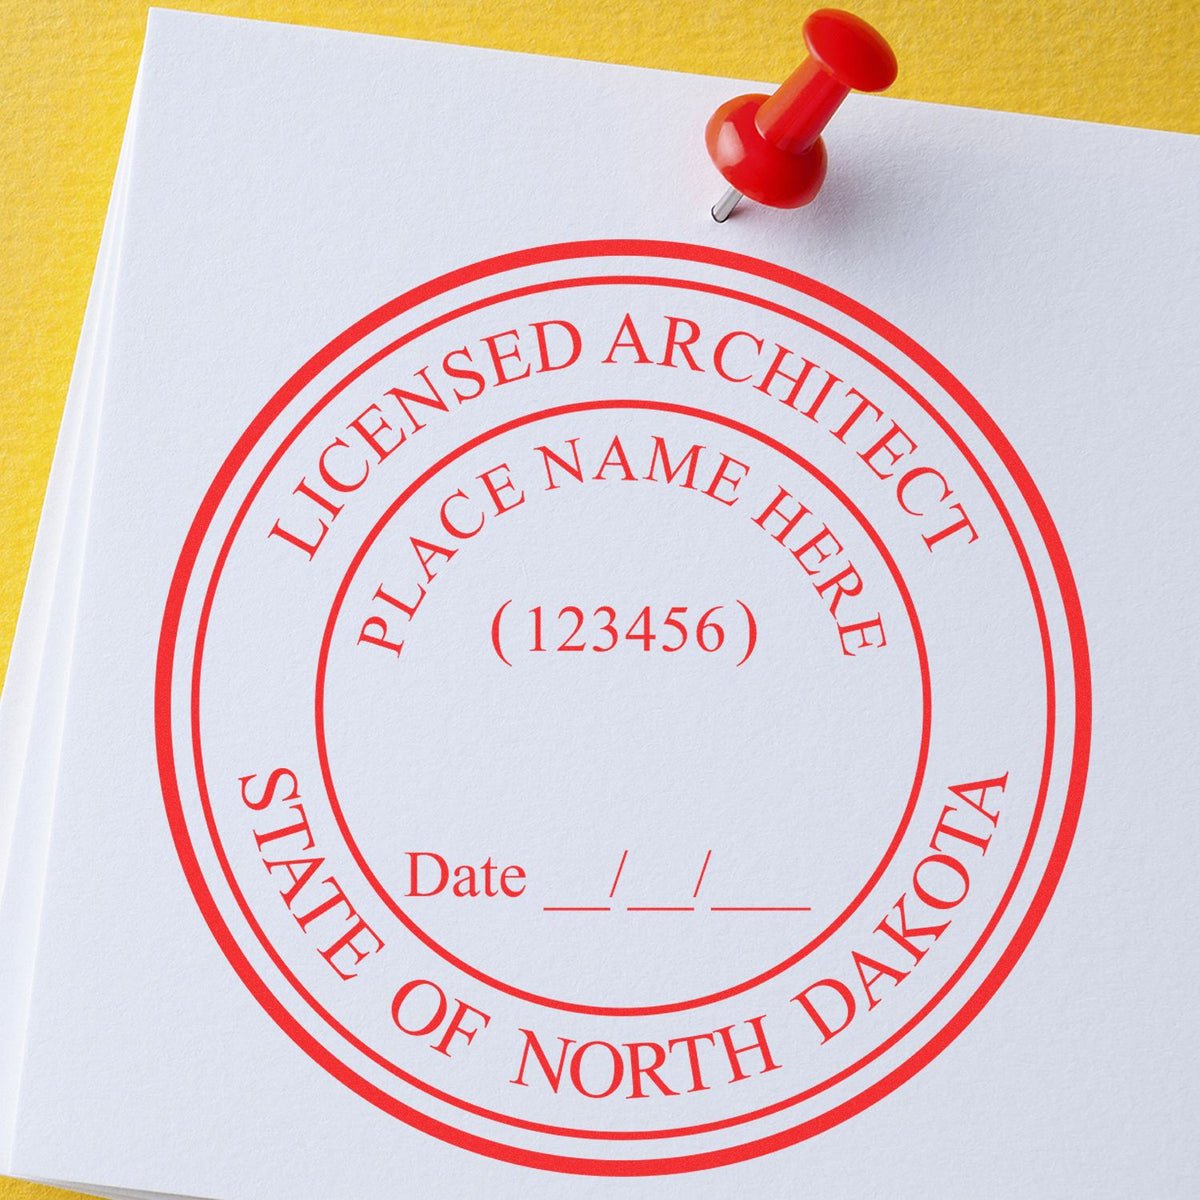 Slim Pre-Inked North Dakota Architect Seal Stamp in use photo showing a stamped imprint of the Slim Pre-Inked North Dakota Architect Seal Stamp